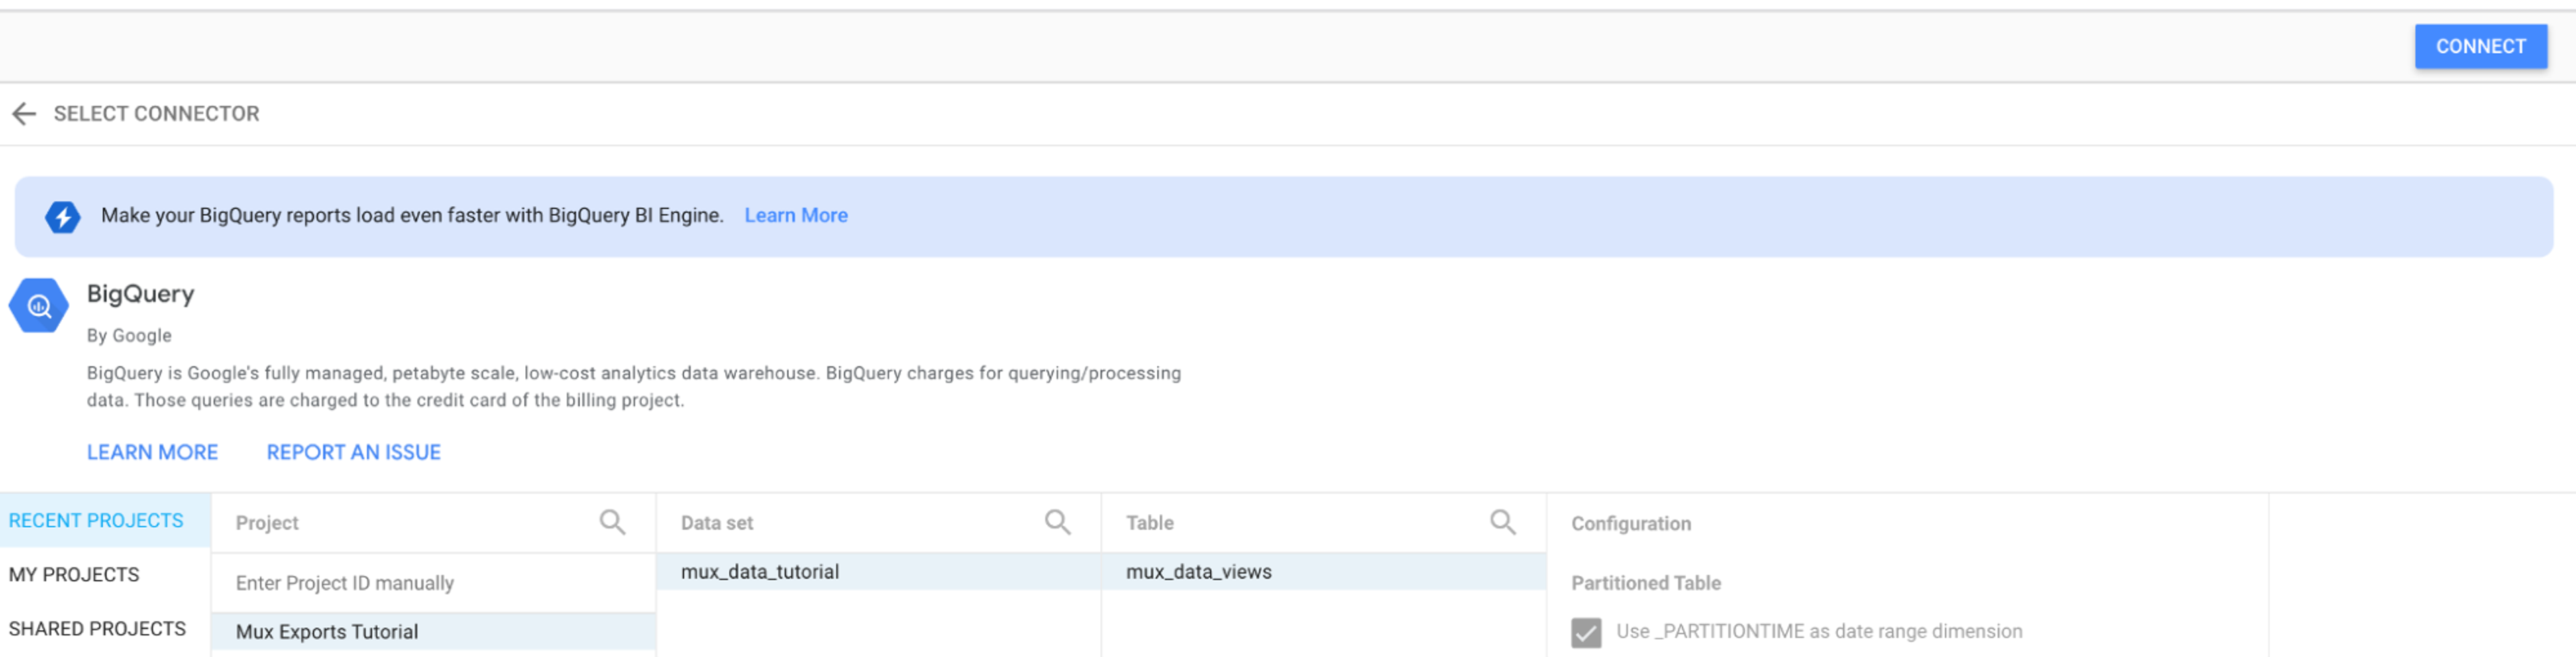 A screenshot of the BigQuery connector settings. The example table we created in BigQuery earlier in this article is shown as selected.